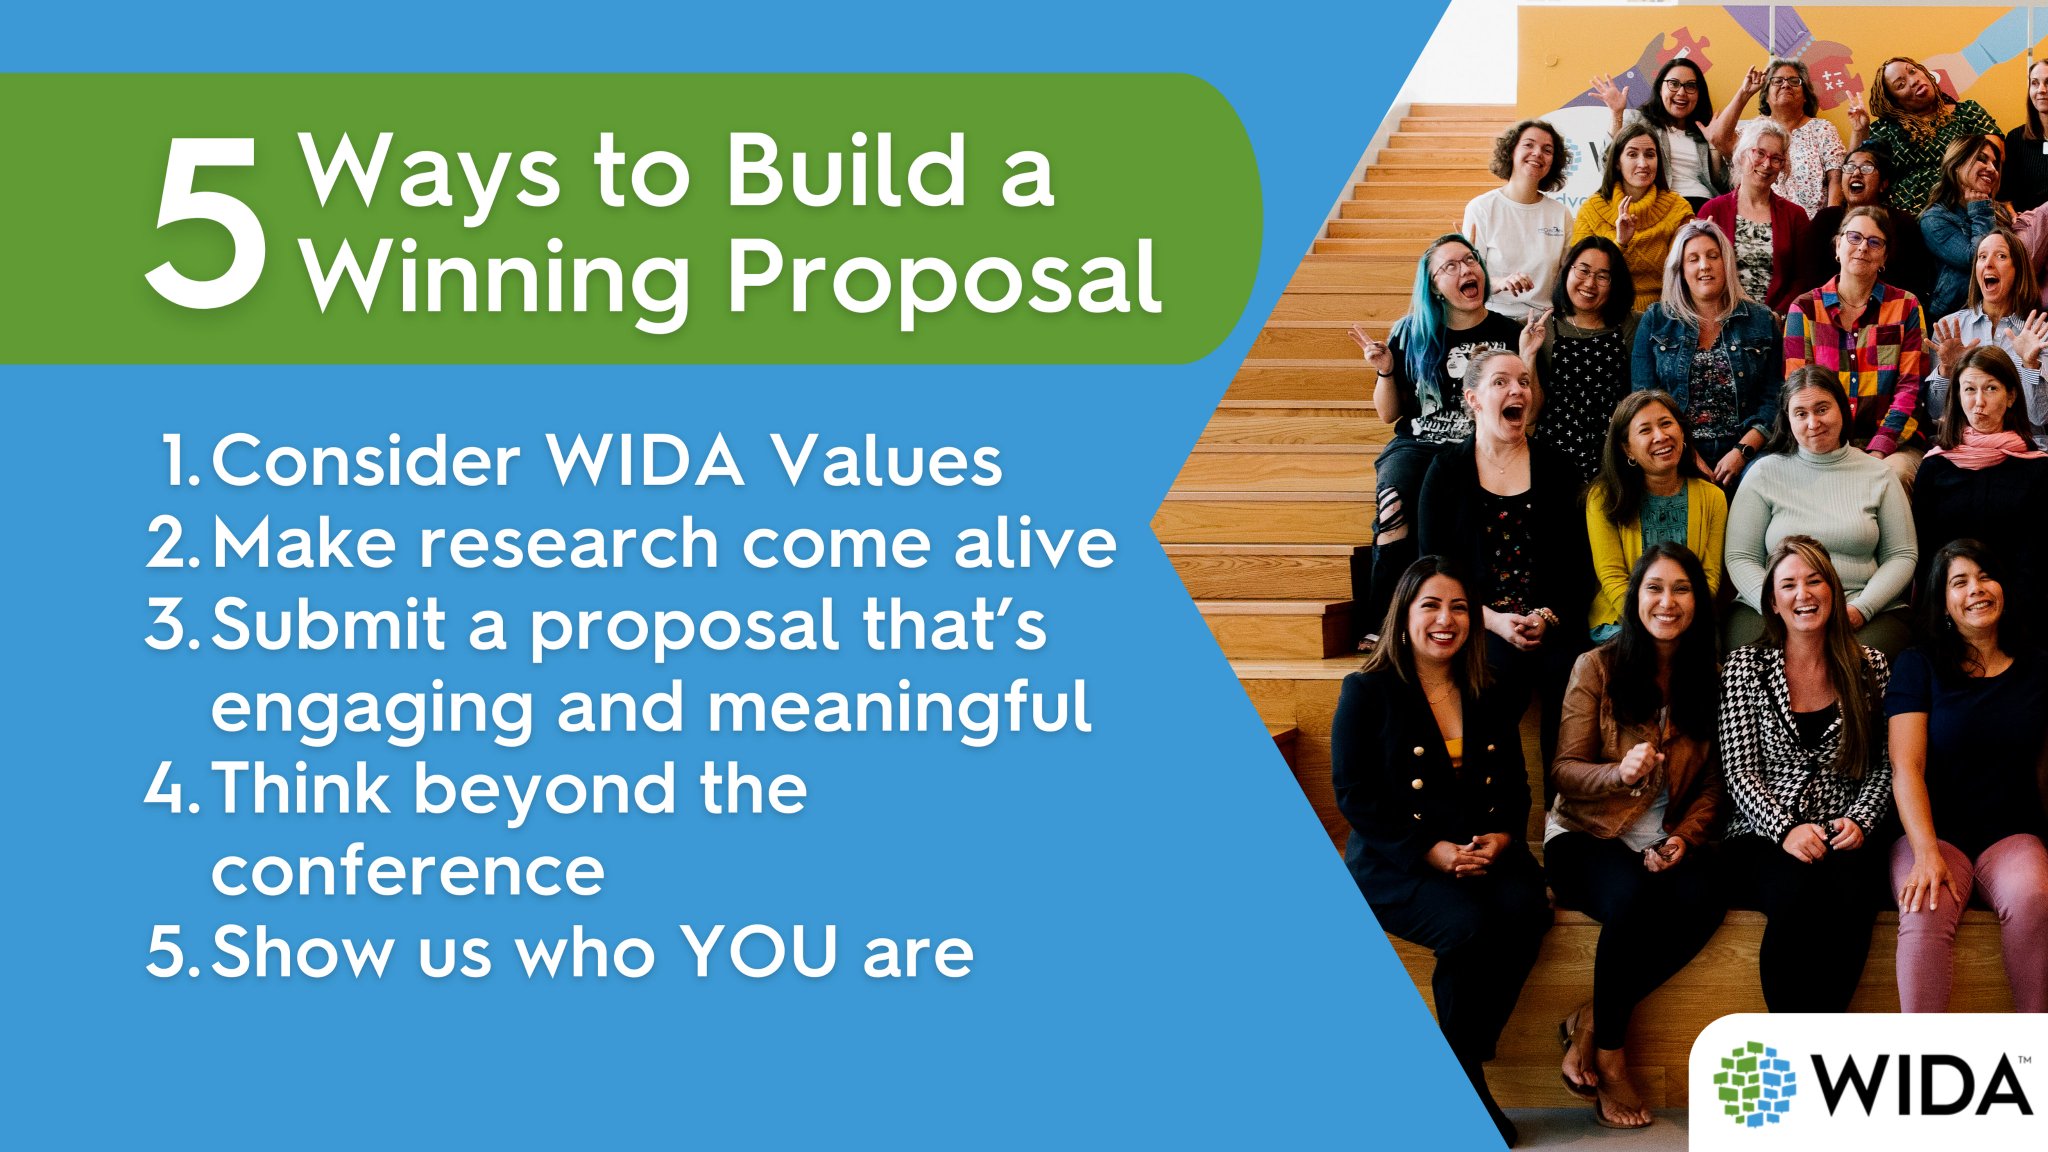 WIDA™ on Twitter "⏳ One week until proposals are due for the 2023 WIDA